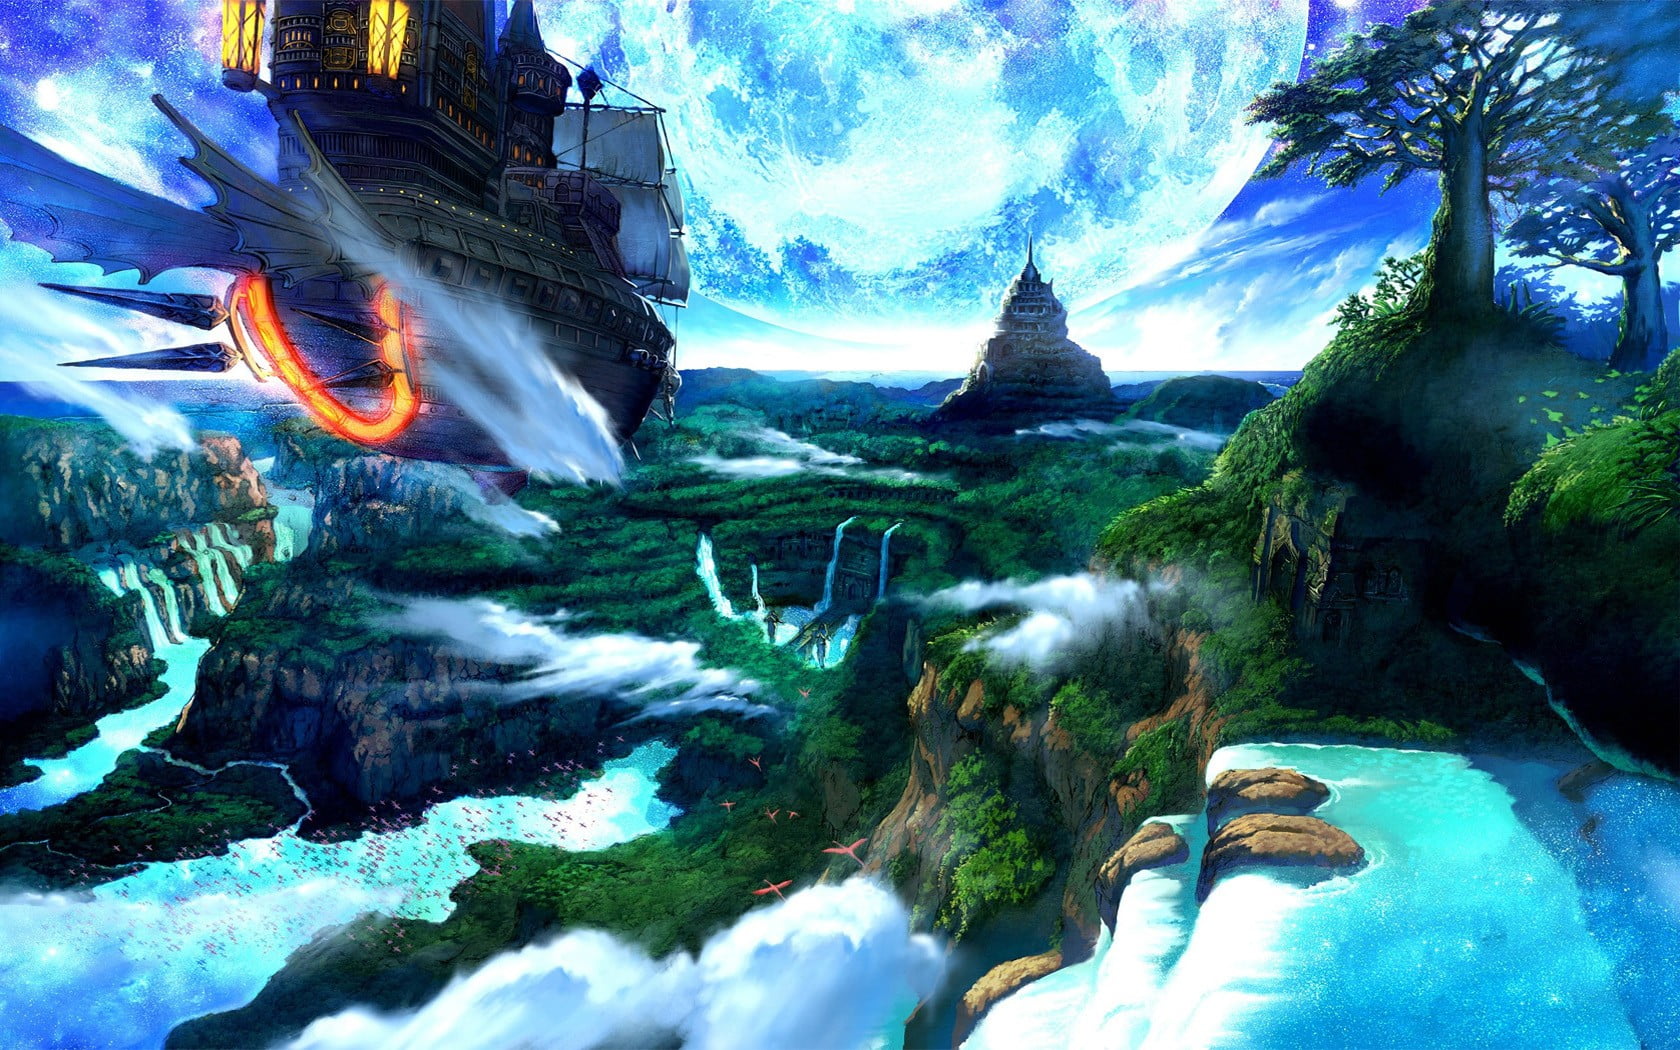 forest digital art, airships, fantasy art, waterfall, beauty in nature